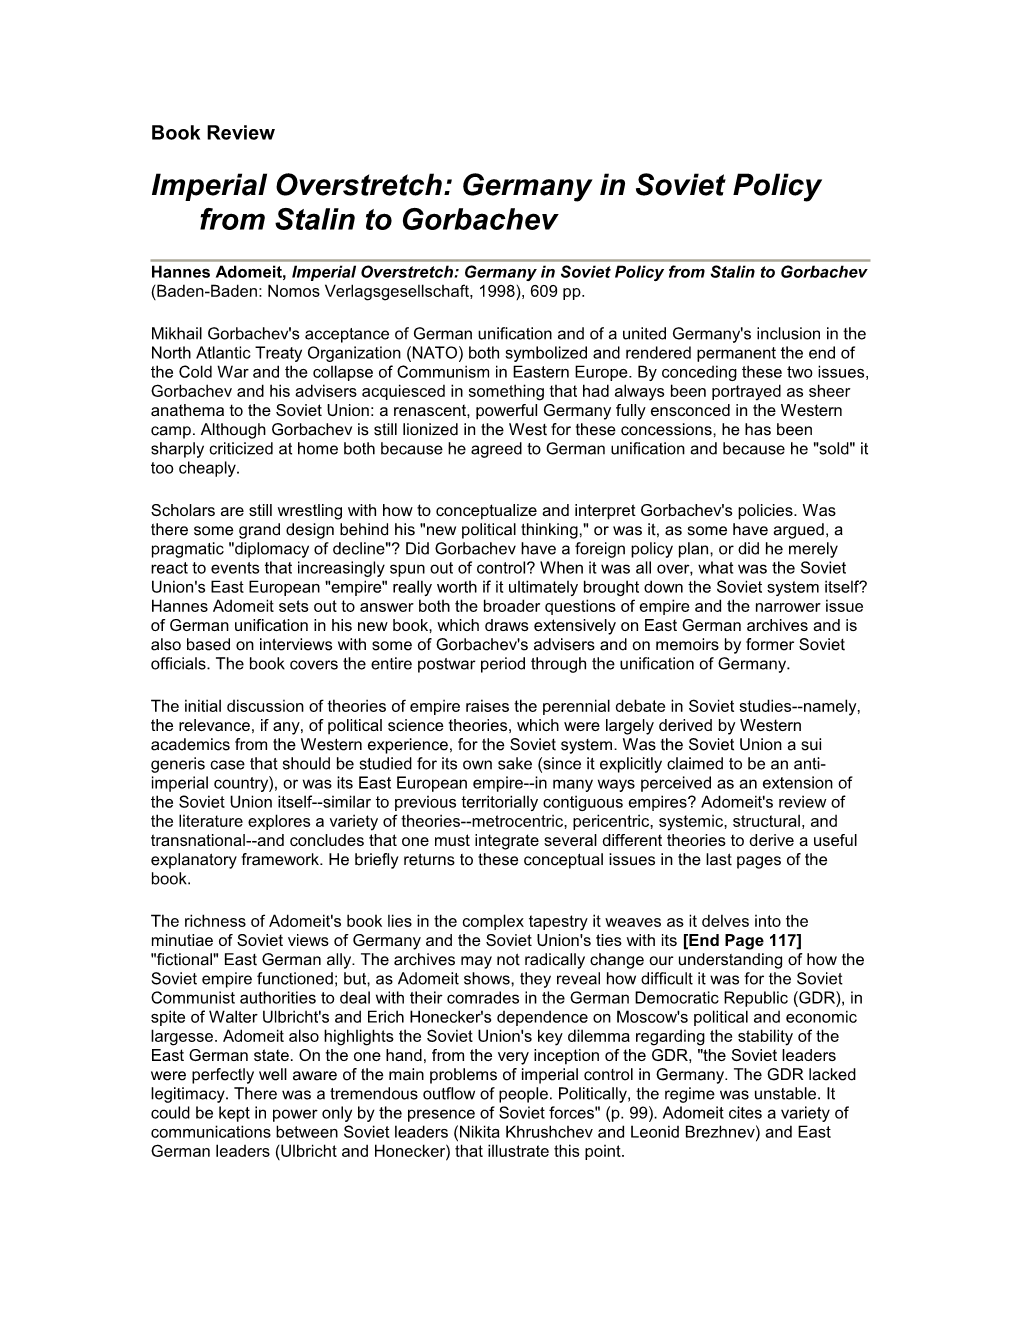 Imperial Overstretch: Germany in Soviet Policy from Stalin to Gorbachev